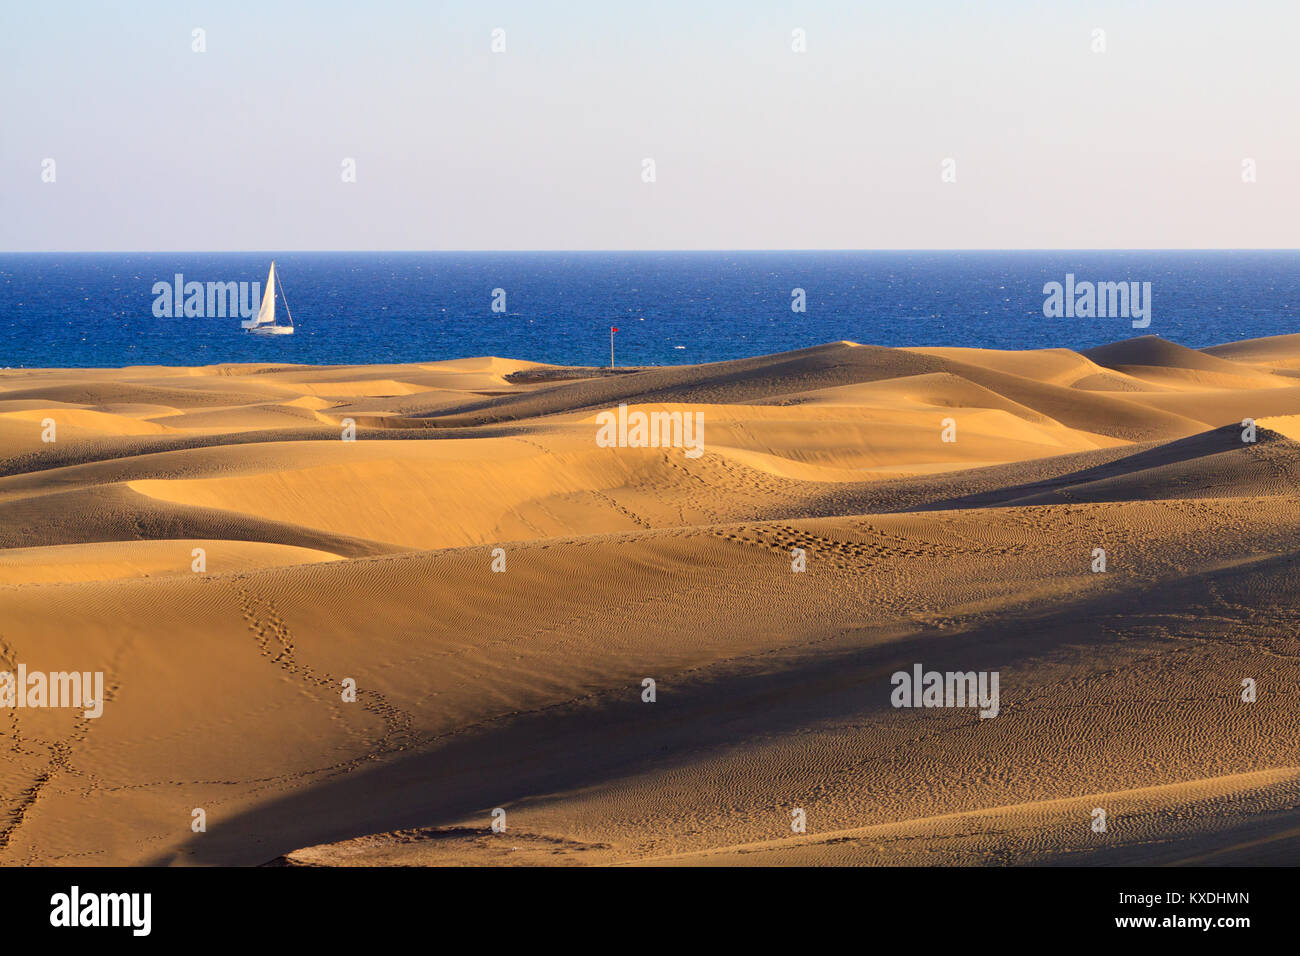 Dunes in Maspalomas the Gran Canaria island with the sailboat on ocean in background. Stock Photo